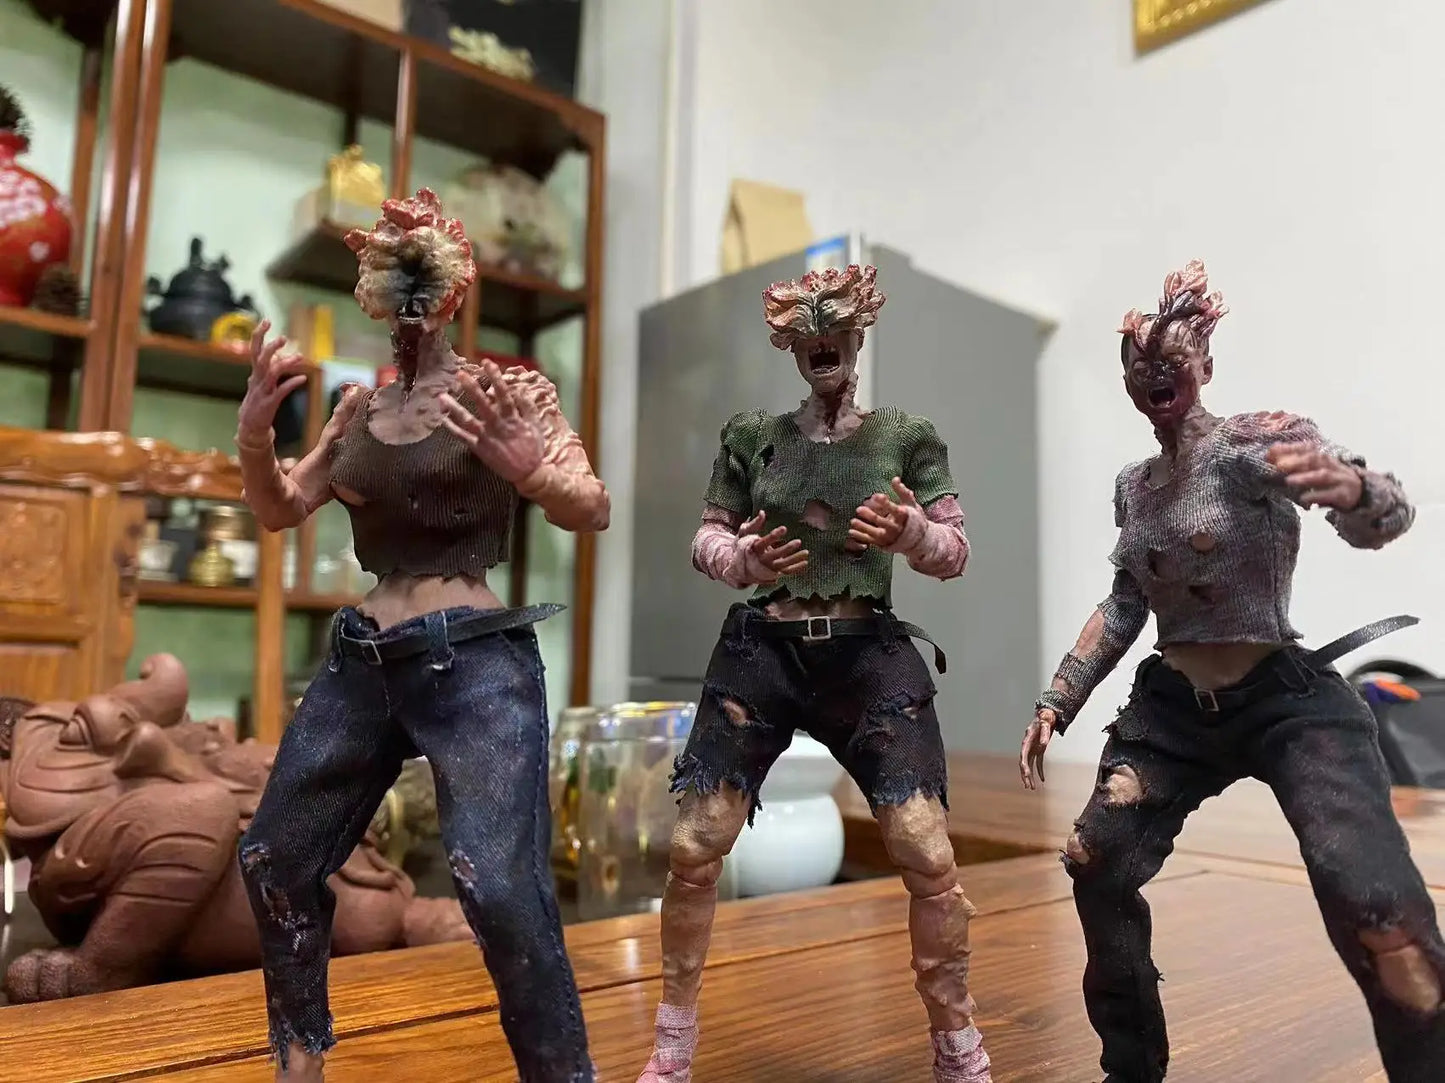 The Last of Us Zombie Figures - The Three Fates - Available at 2Fast2See.co